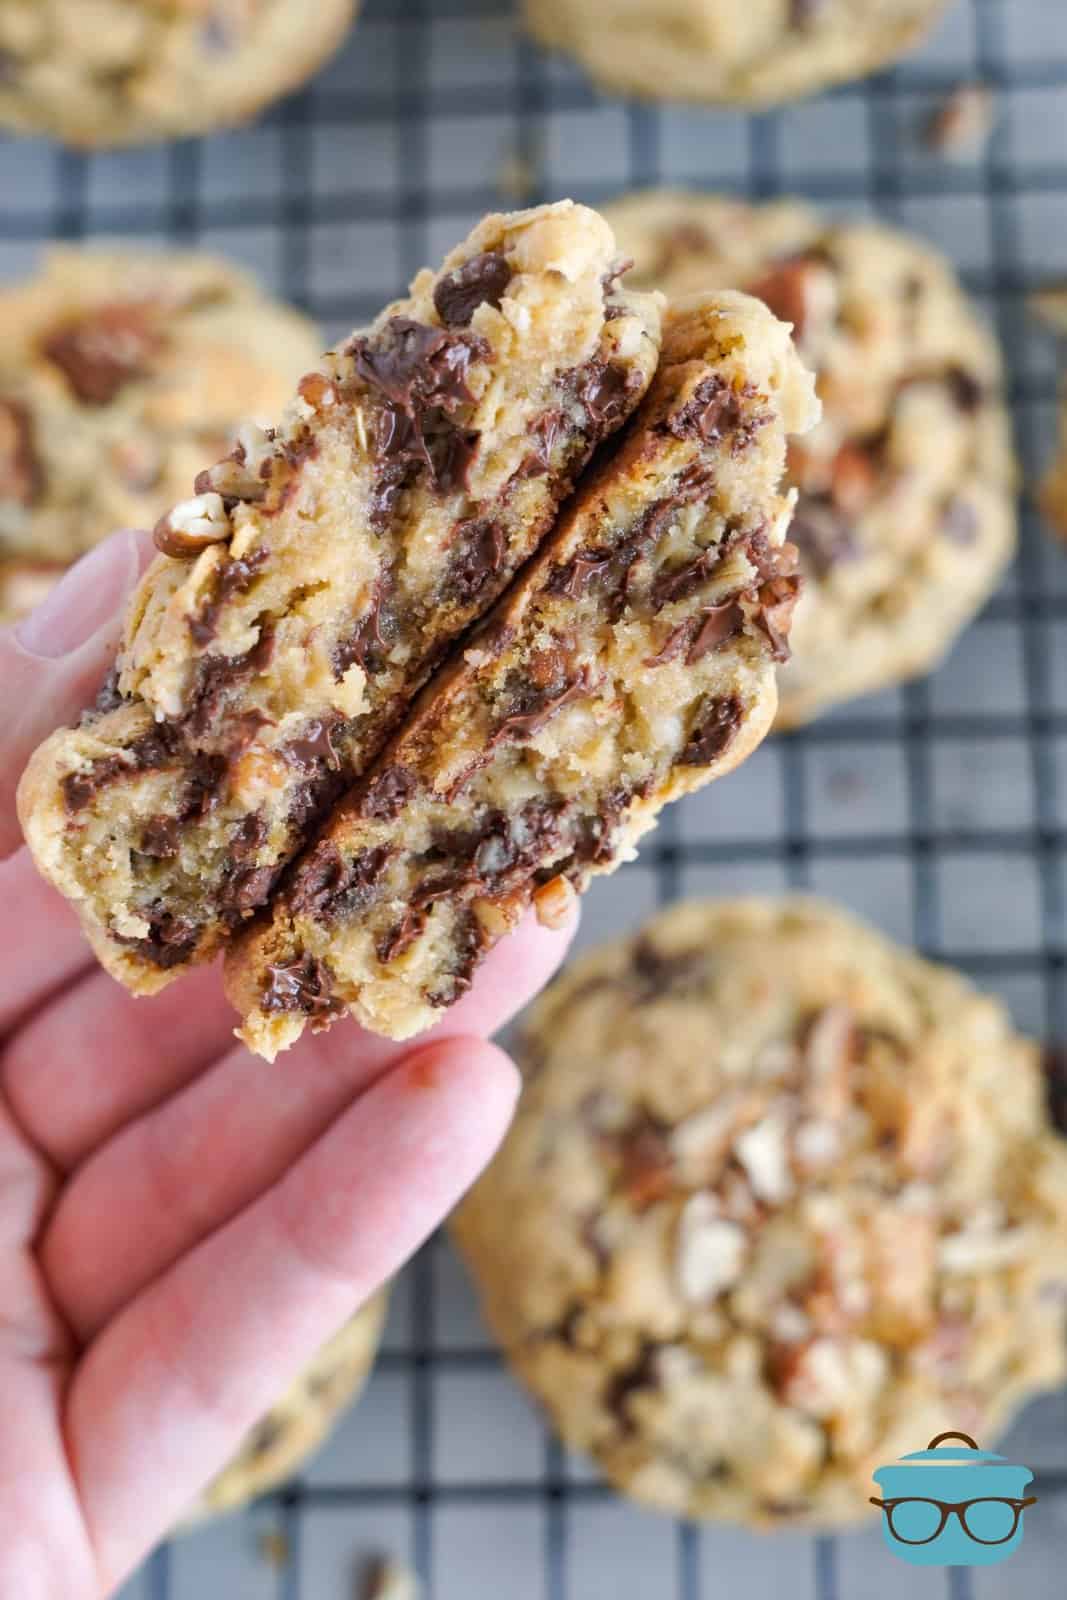 An Oatmeal Chocolate Chip Cookie broken in half with a hand holding it.